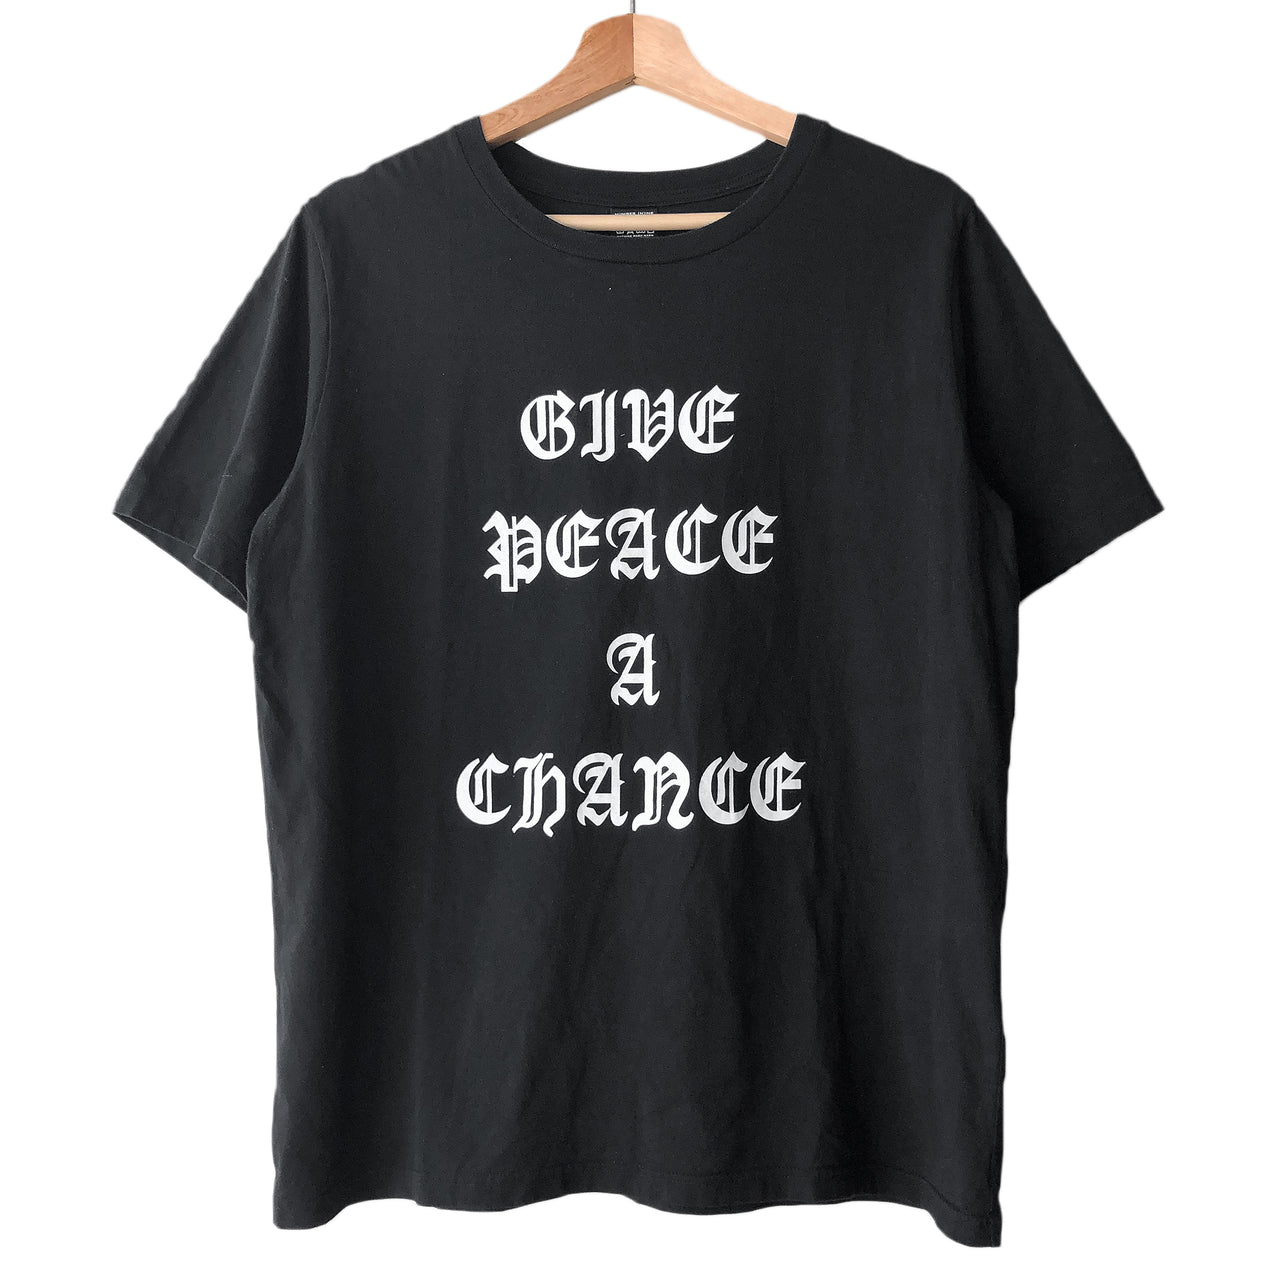 Number (N)ine "Give Peace a Chance" Tee